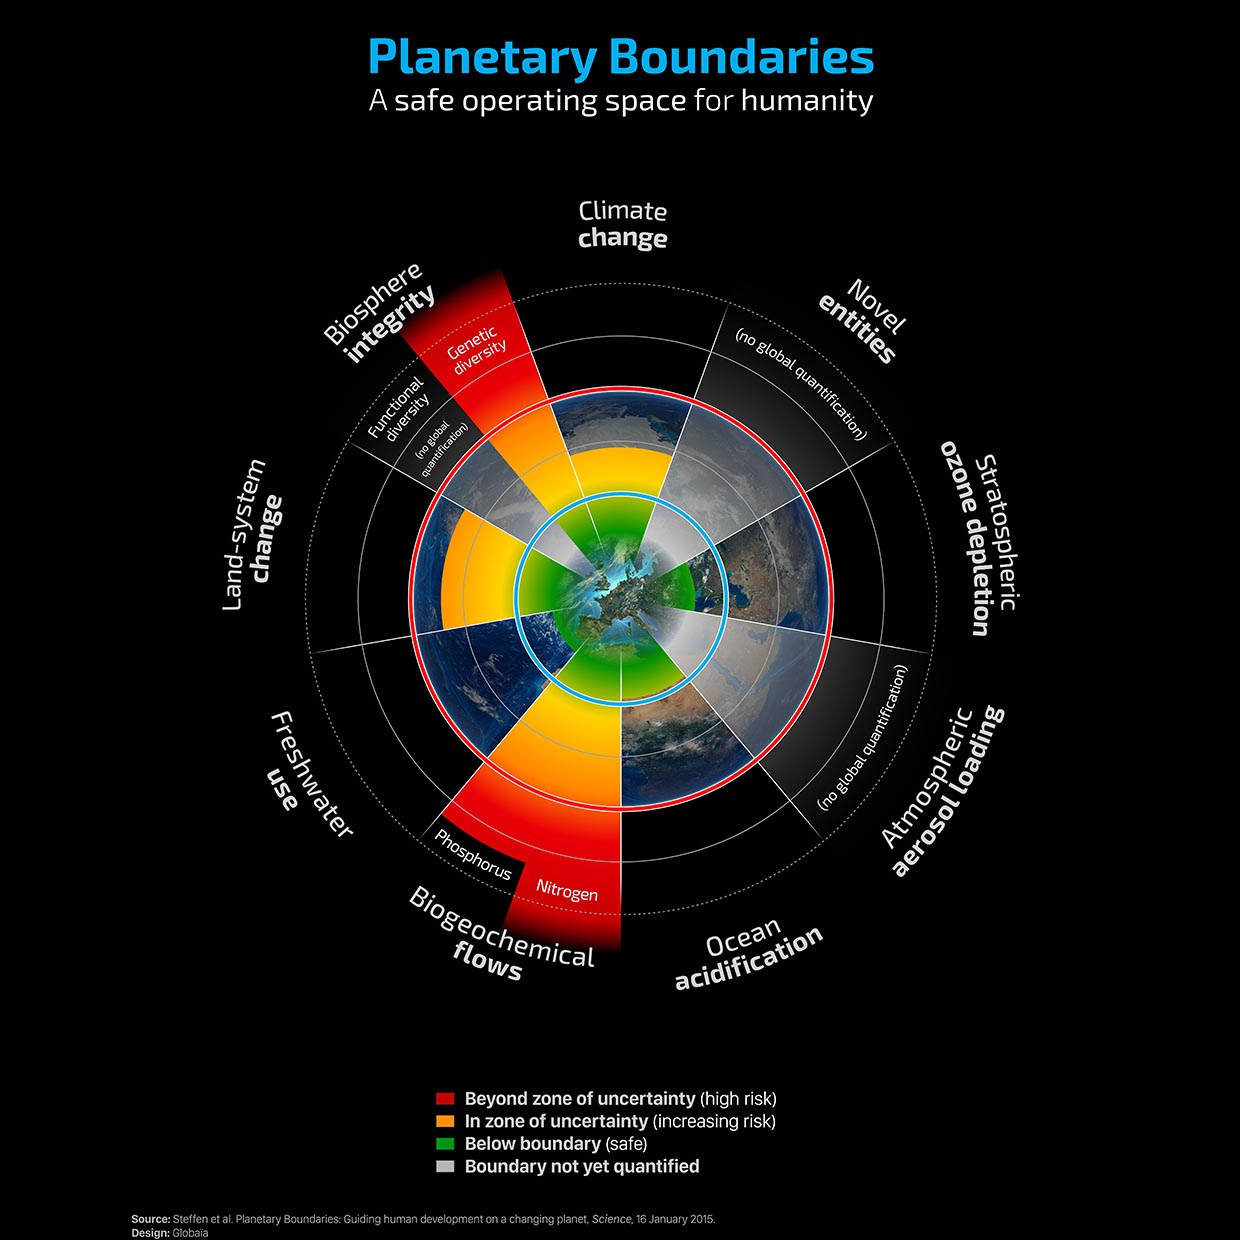 According to Prof. Rockström, the nine interlinked planetary boundaries behave like the three musketeers: one for all and all for one. Bringing about change in one area will affect the others. Image credit - Planetary boundaries/Steffen et al.